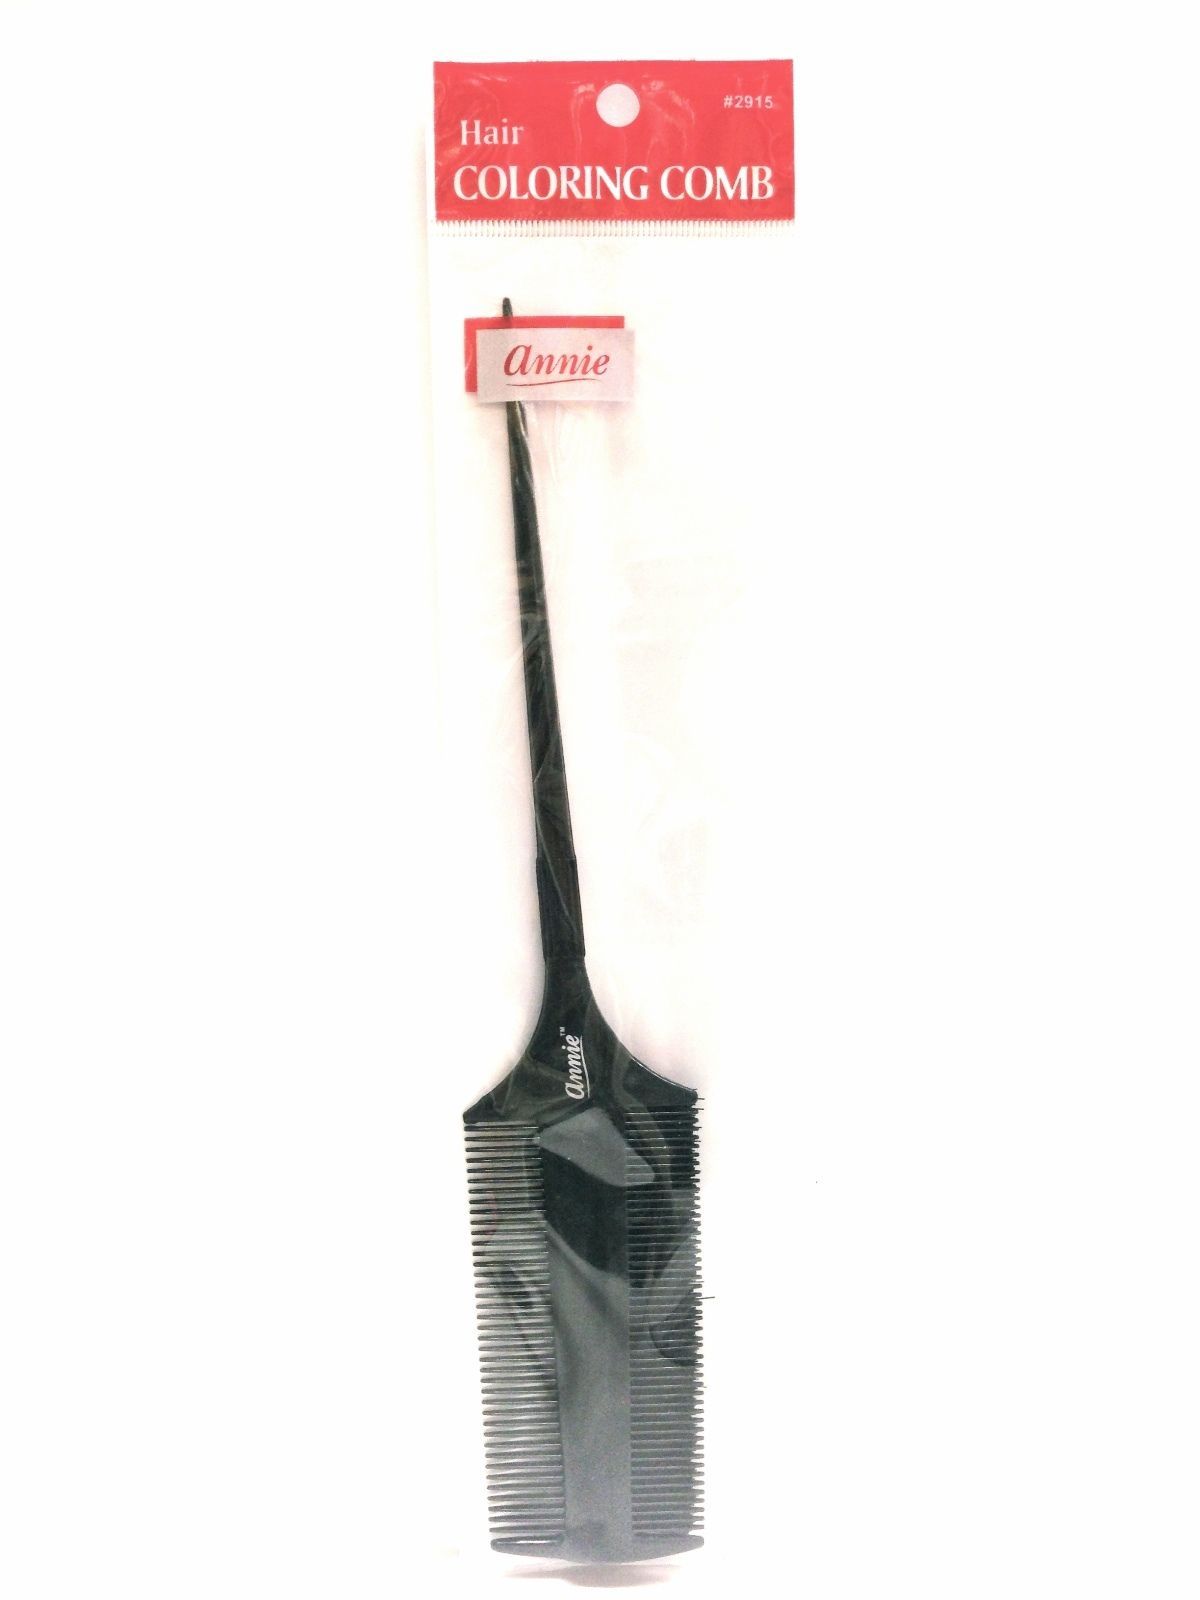 ANNIE TINT BRUSH DYE BRUSH DOUBLE SIDED HAIR COLORING COMB  9"x1.5" #2915 - $1.89